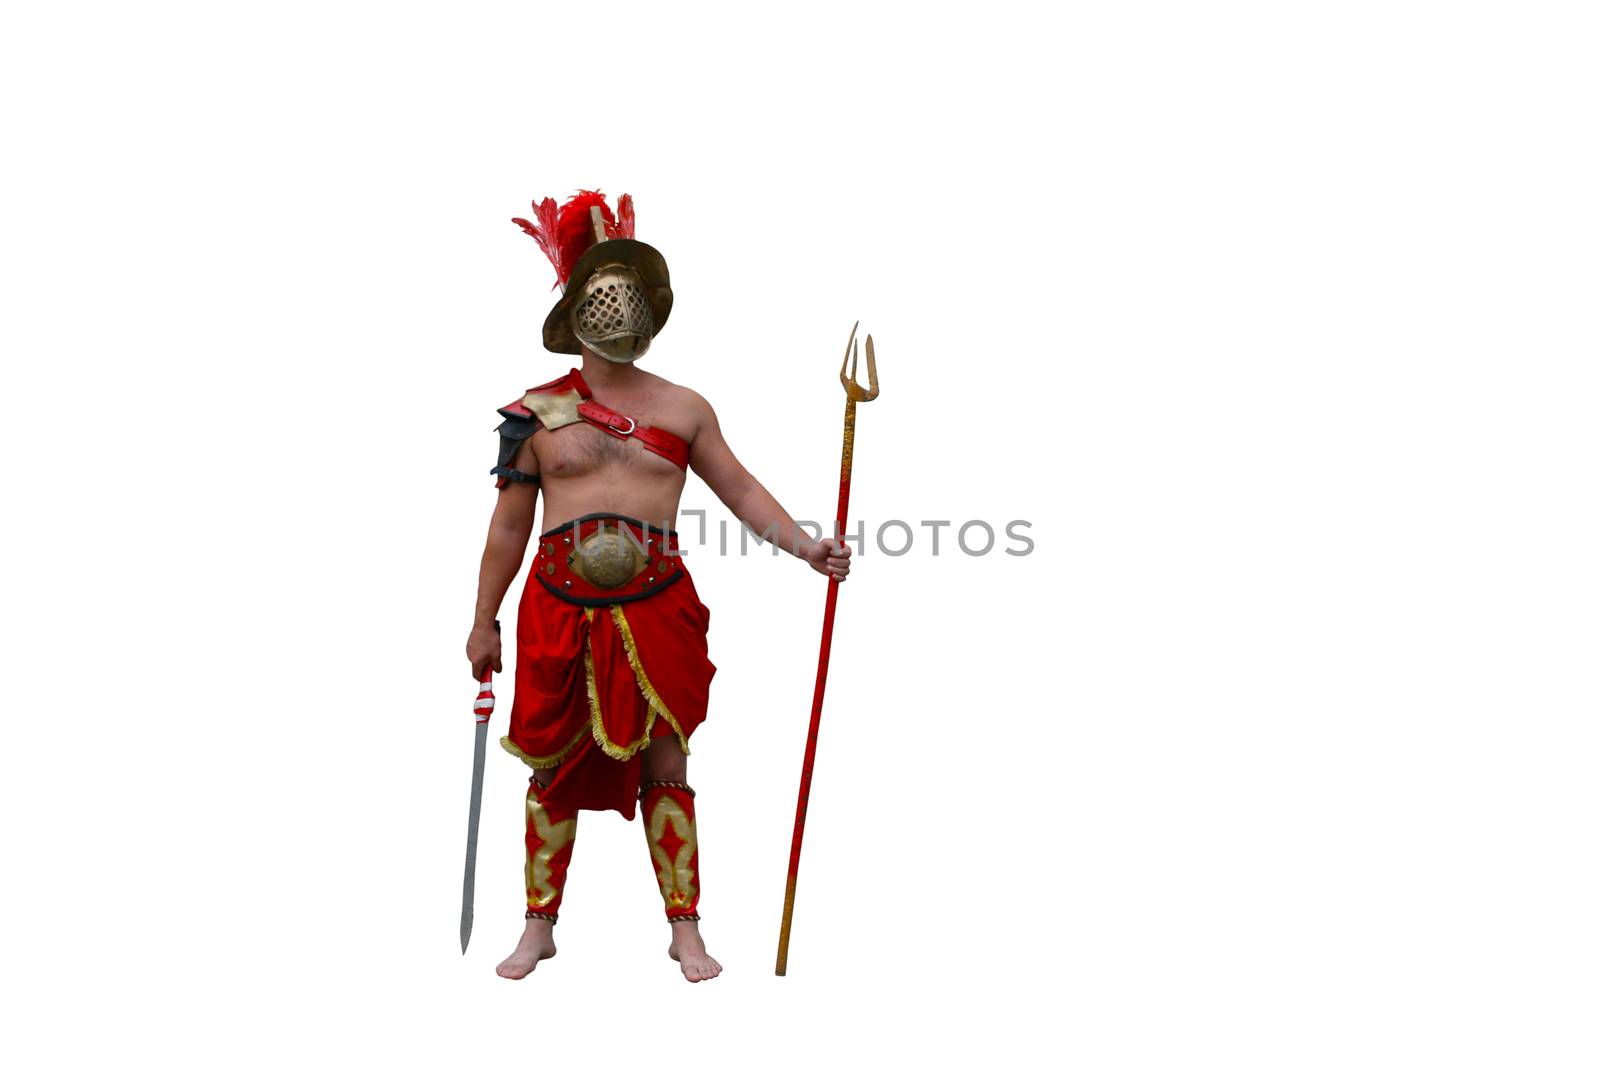 
Roman Gladiator with spear and helmet with feathers on white background. by Igor2006